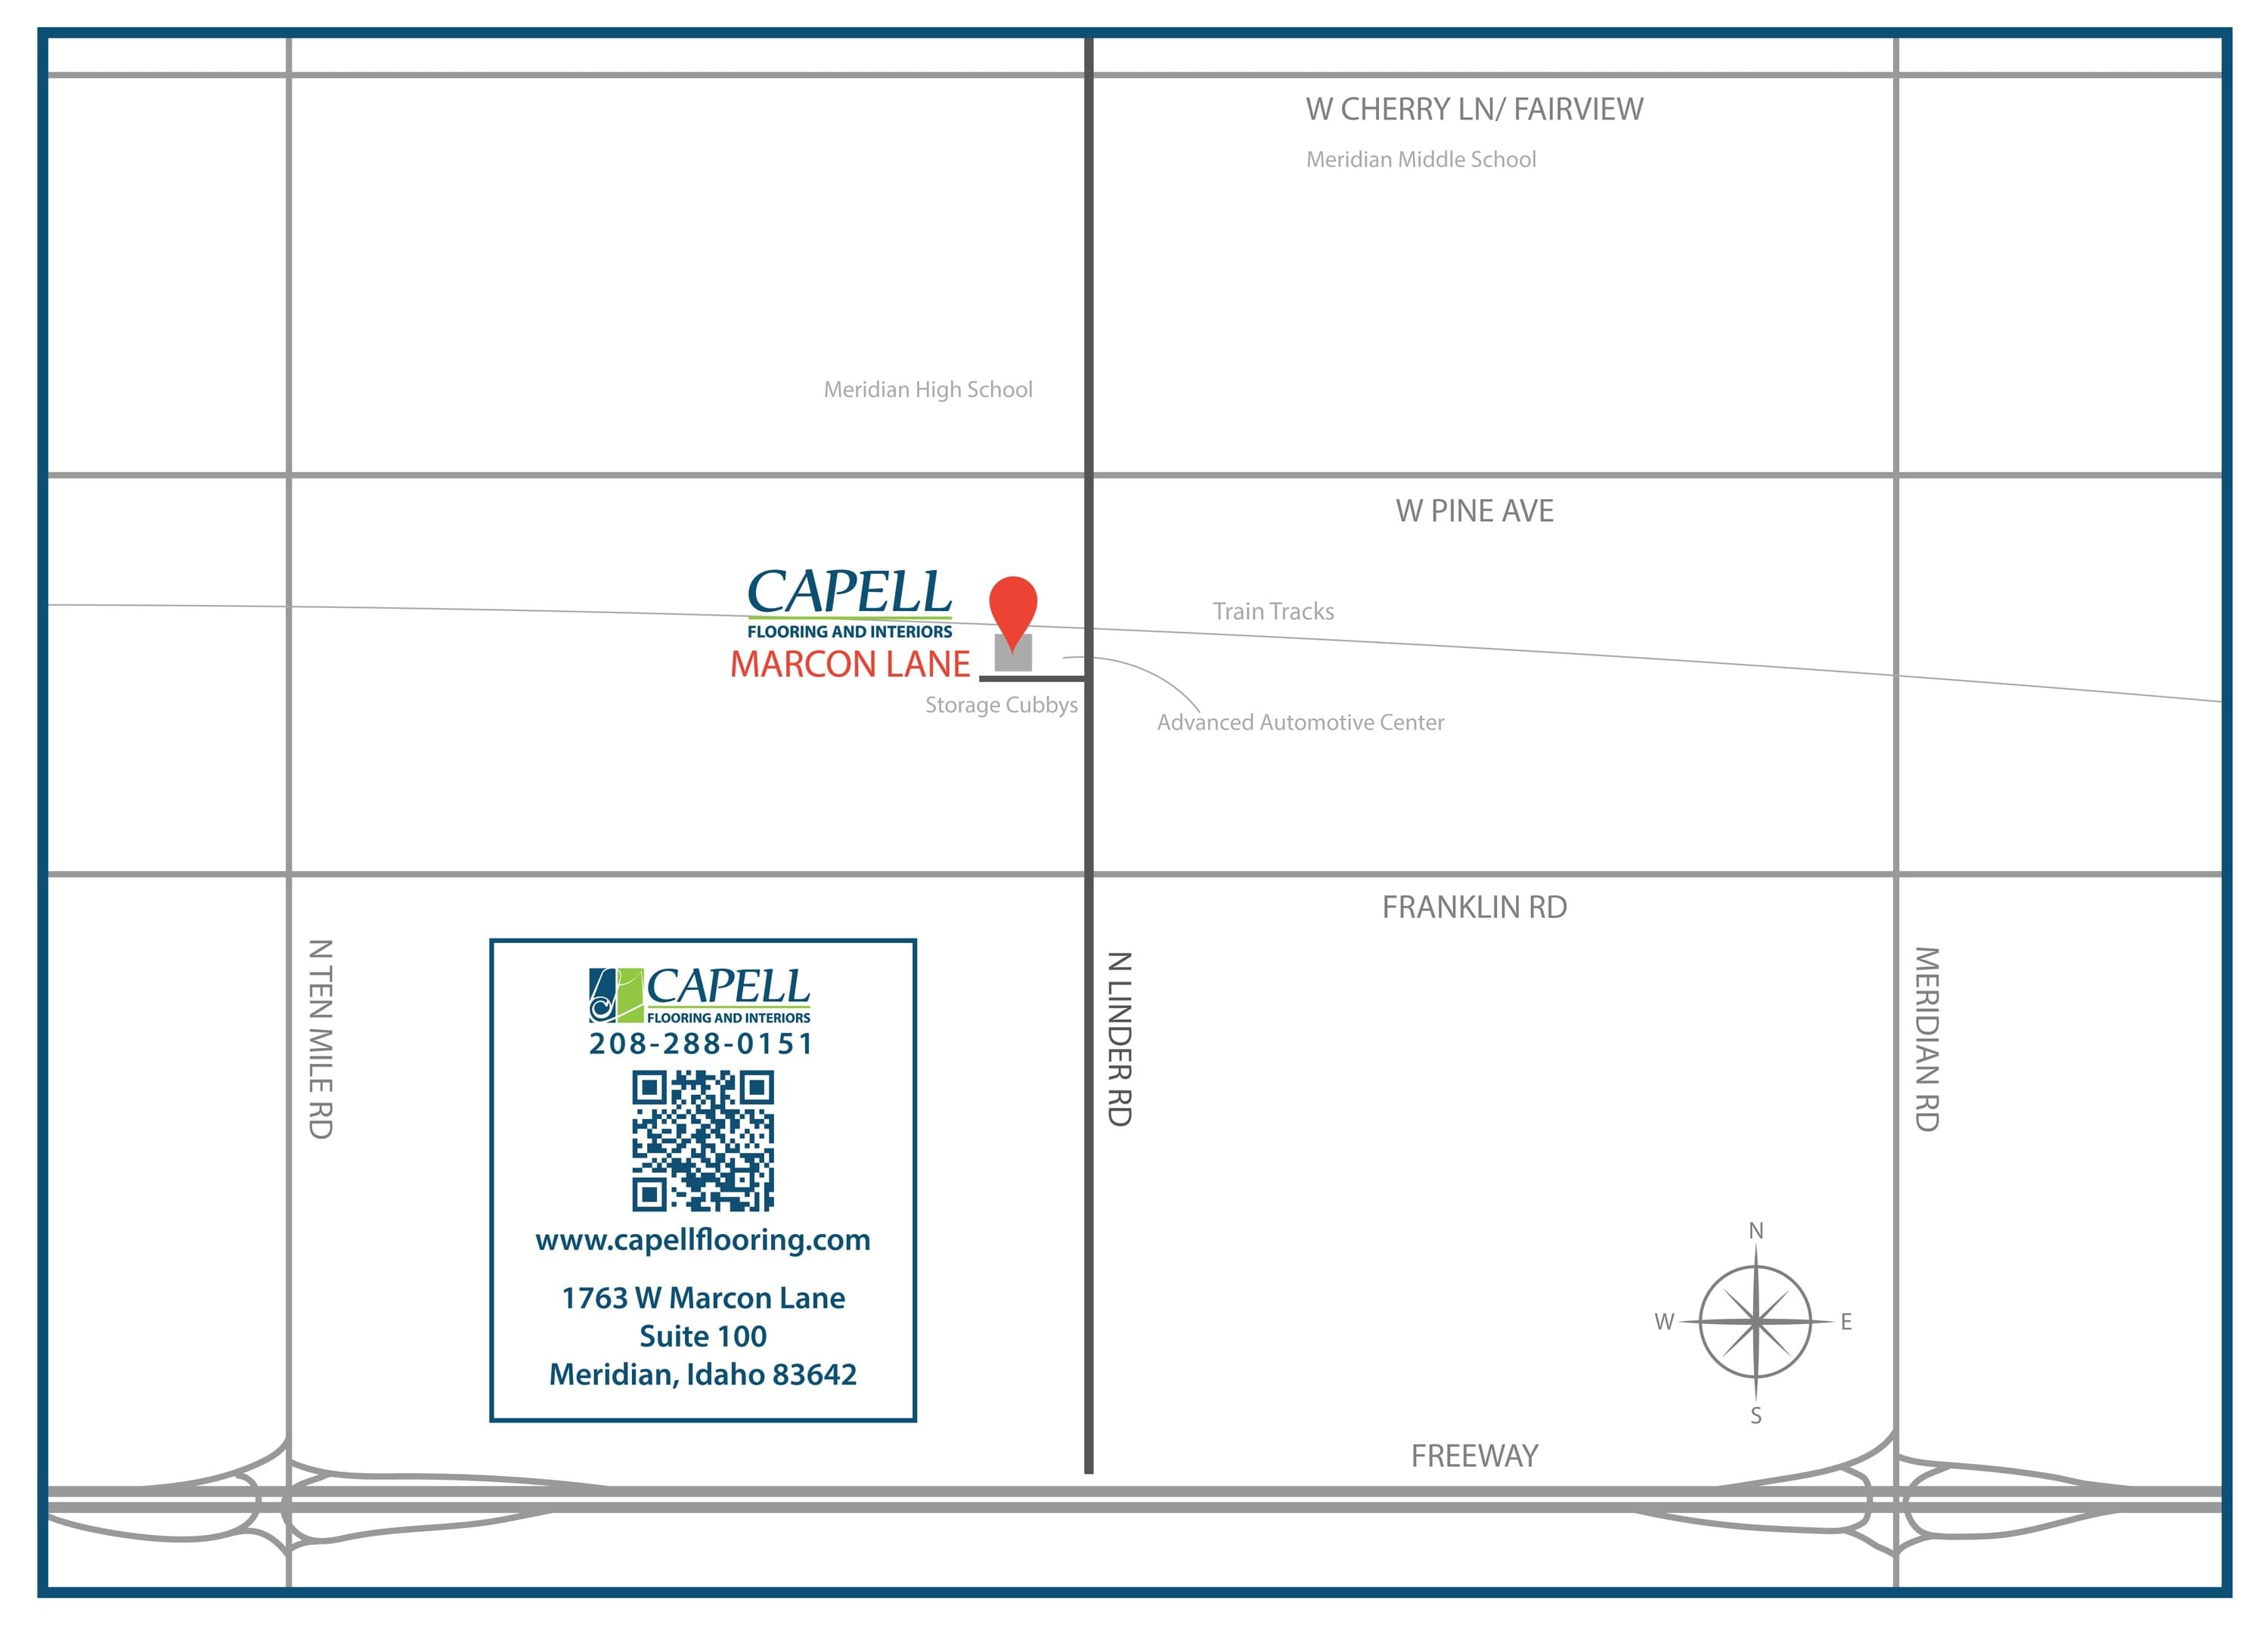 Capell Flooring and Interiors Directions, Meridian Idaho Flooring Store Directions